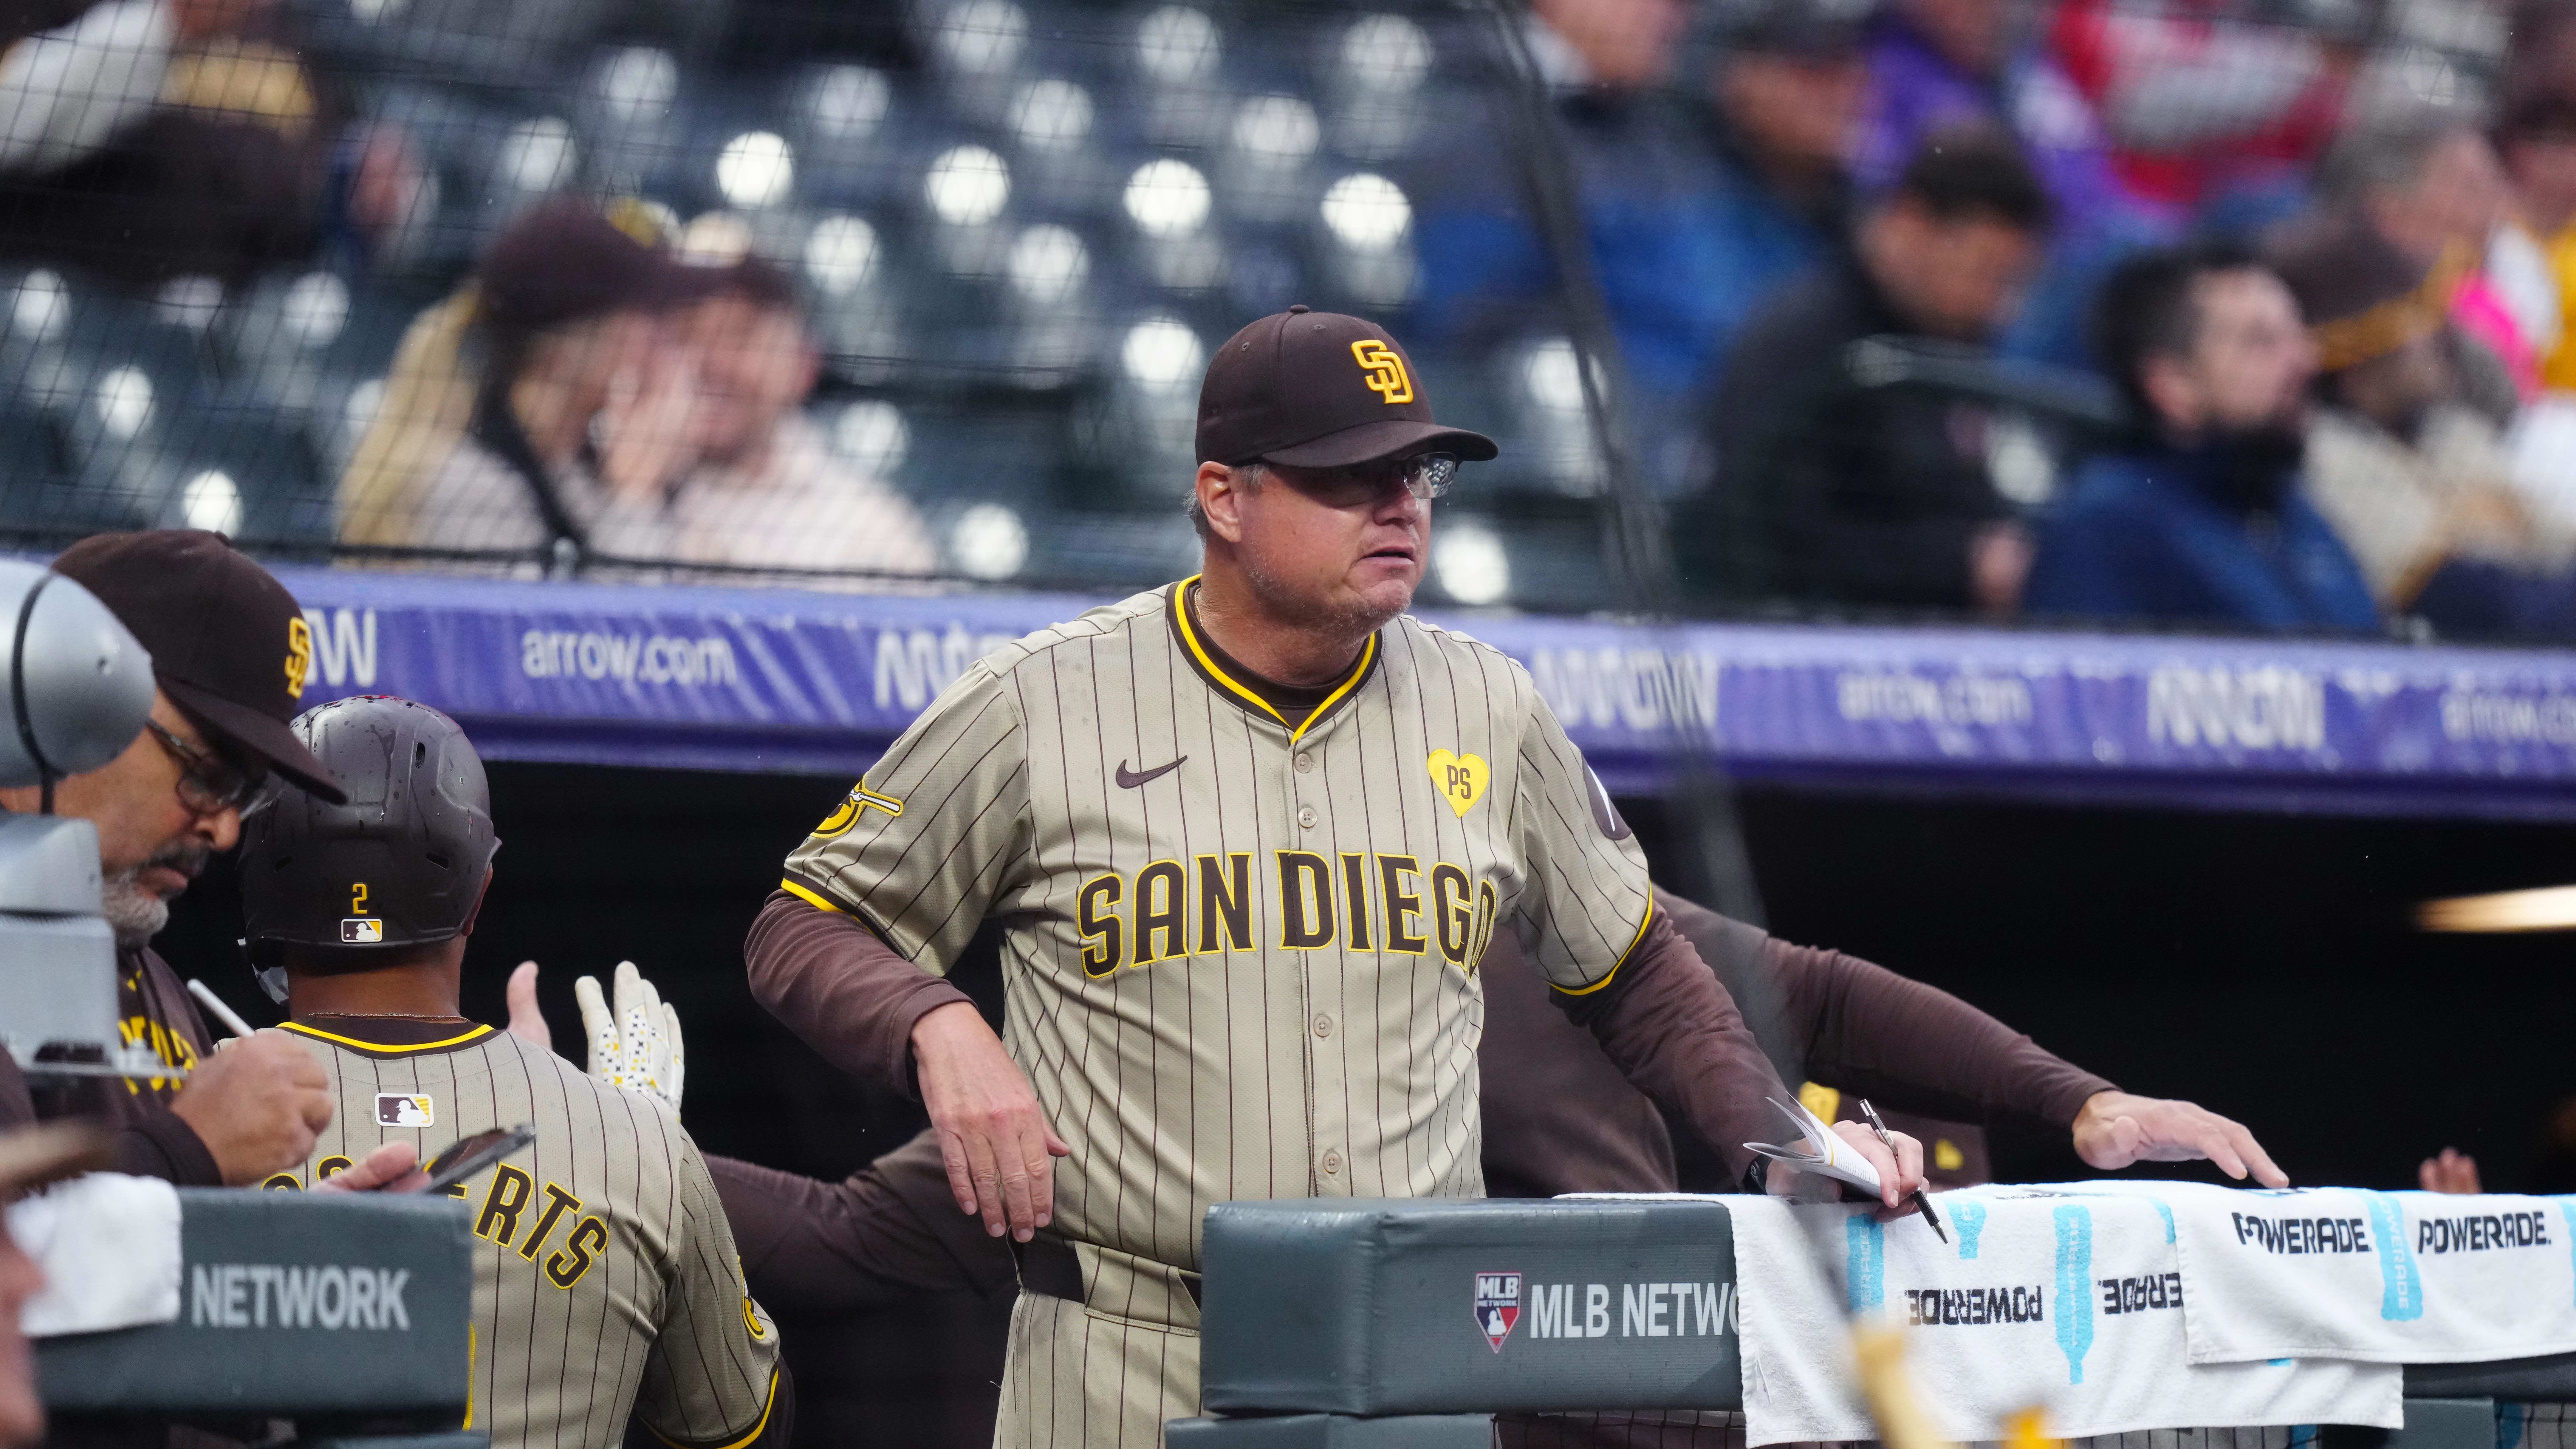 Padres Make Huge Roster Move Ahead of Tuesday's Game to Try to Stop Losing Streak